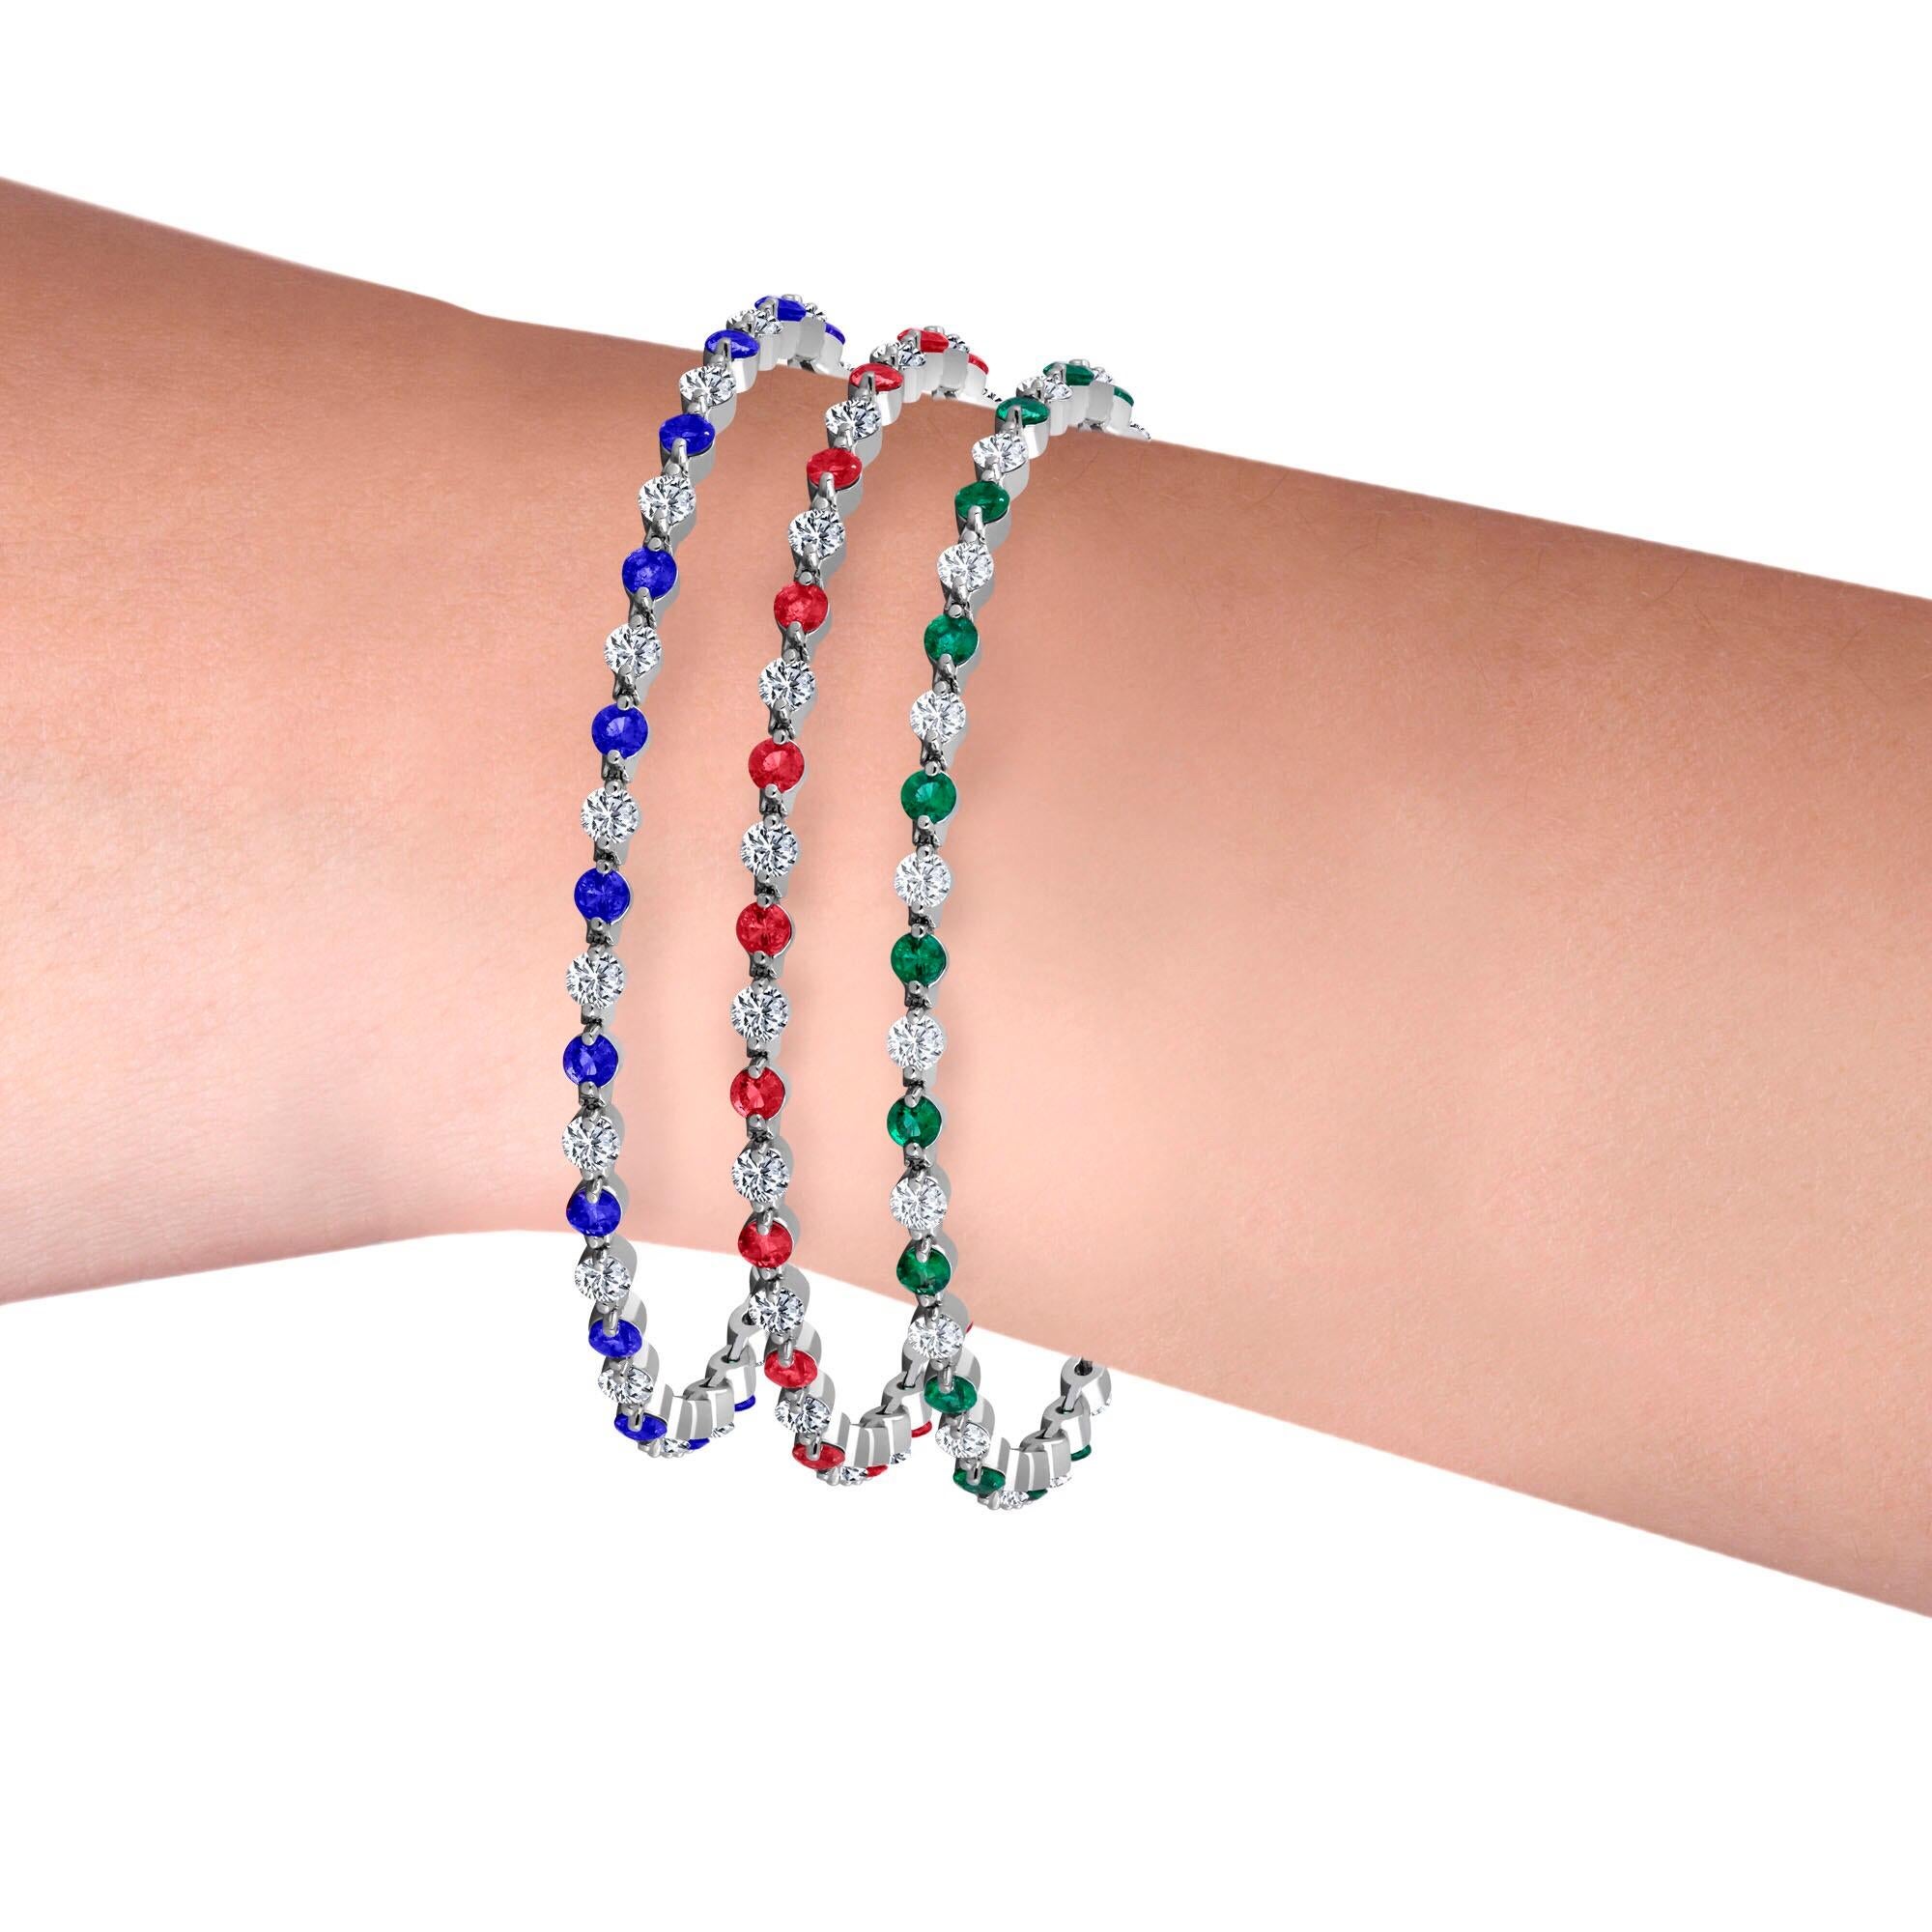 Call our direct line 6468461904
The price listed is for all 3 bracelets together!Gorgeous Emeralds and Diamonds, blood red rubies, and rich sky blue sapphires and diamond bracelets stack and are endless! The lock is invisible and encrusted with